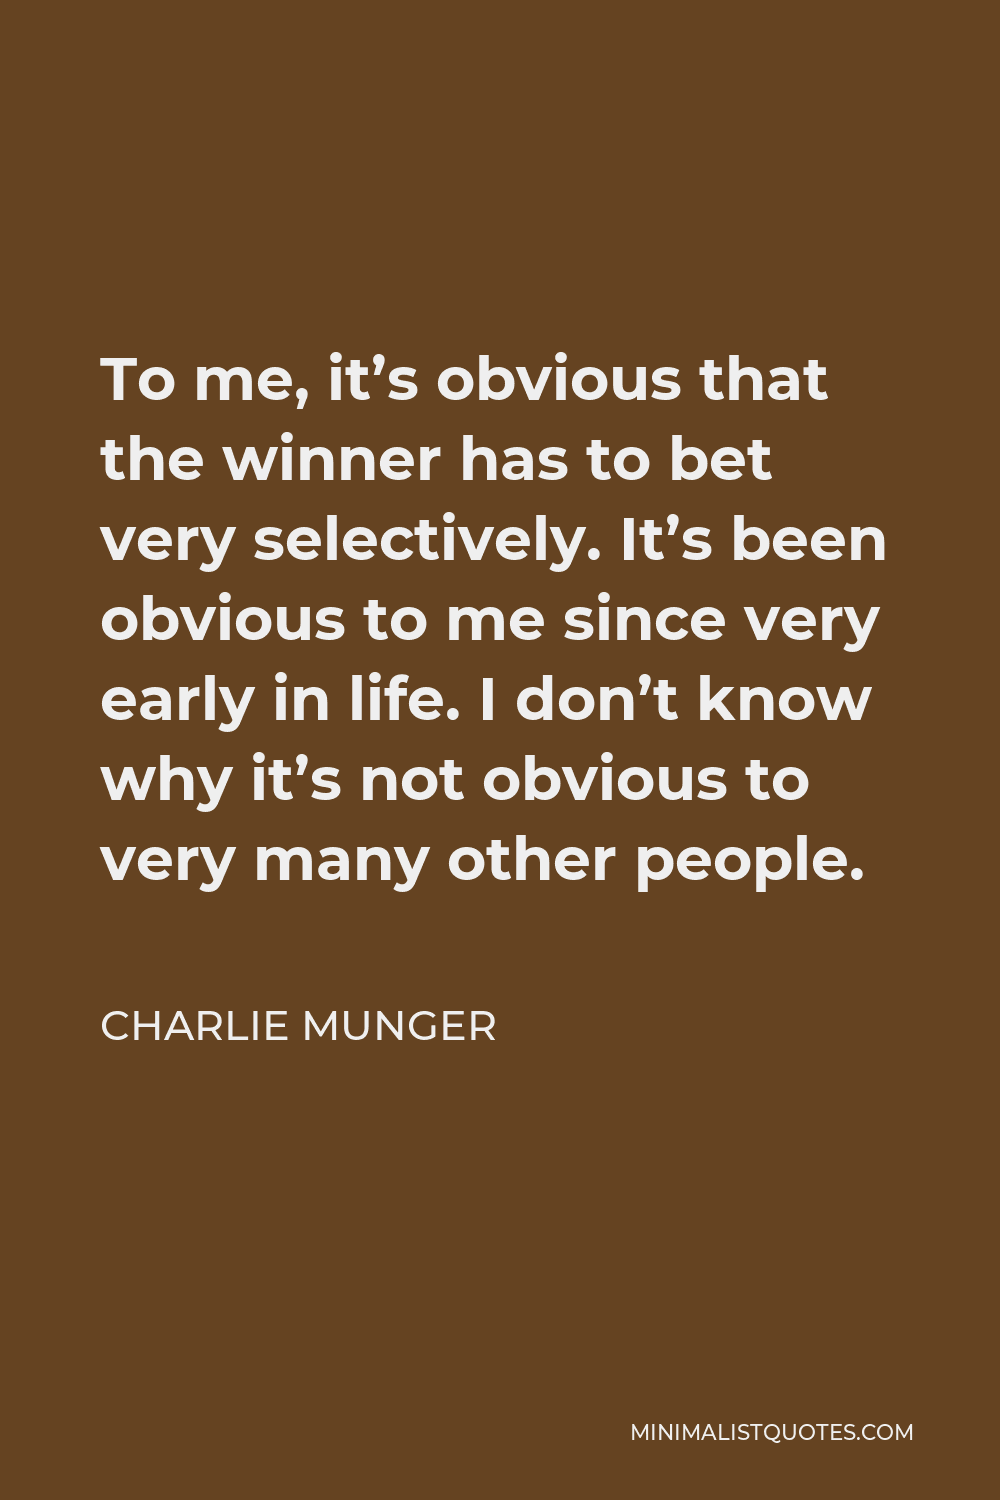 Charlie Munger Quote - To me, it’s obvious that the winner has to bet very selectively. It’s been obvious to me since very early in life. I don’t know why it’s not obvious to very many other people.